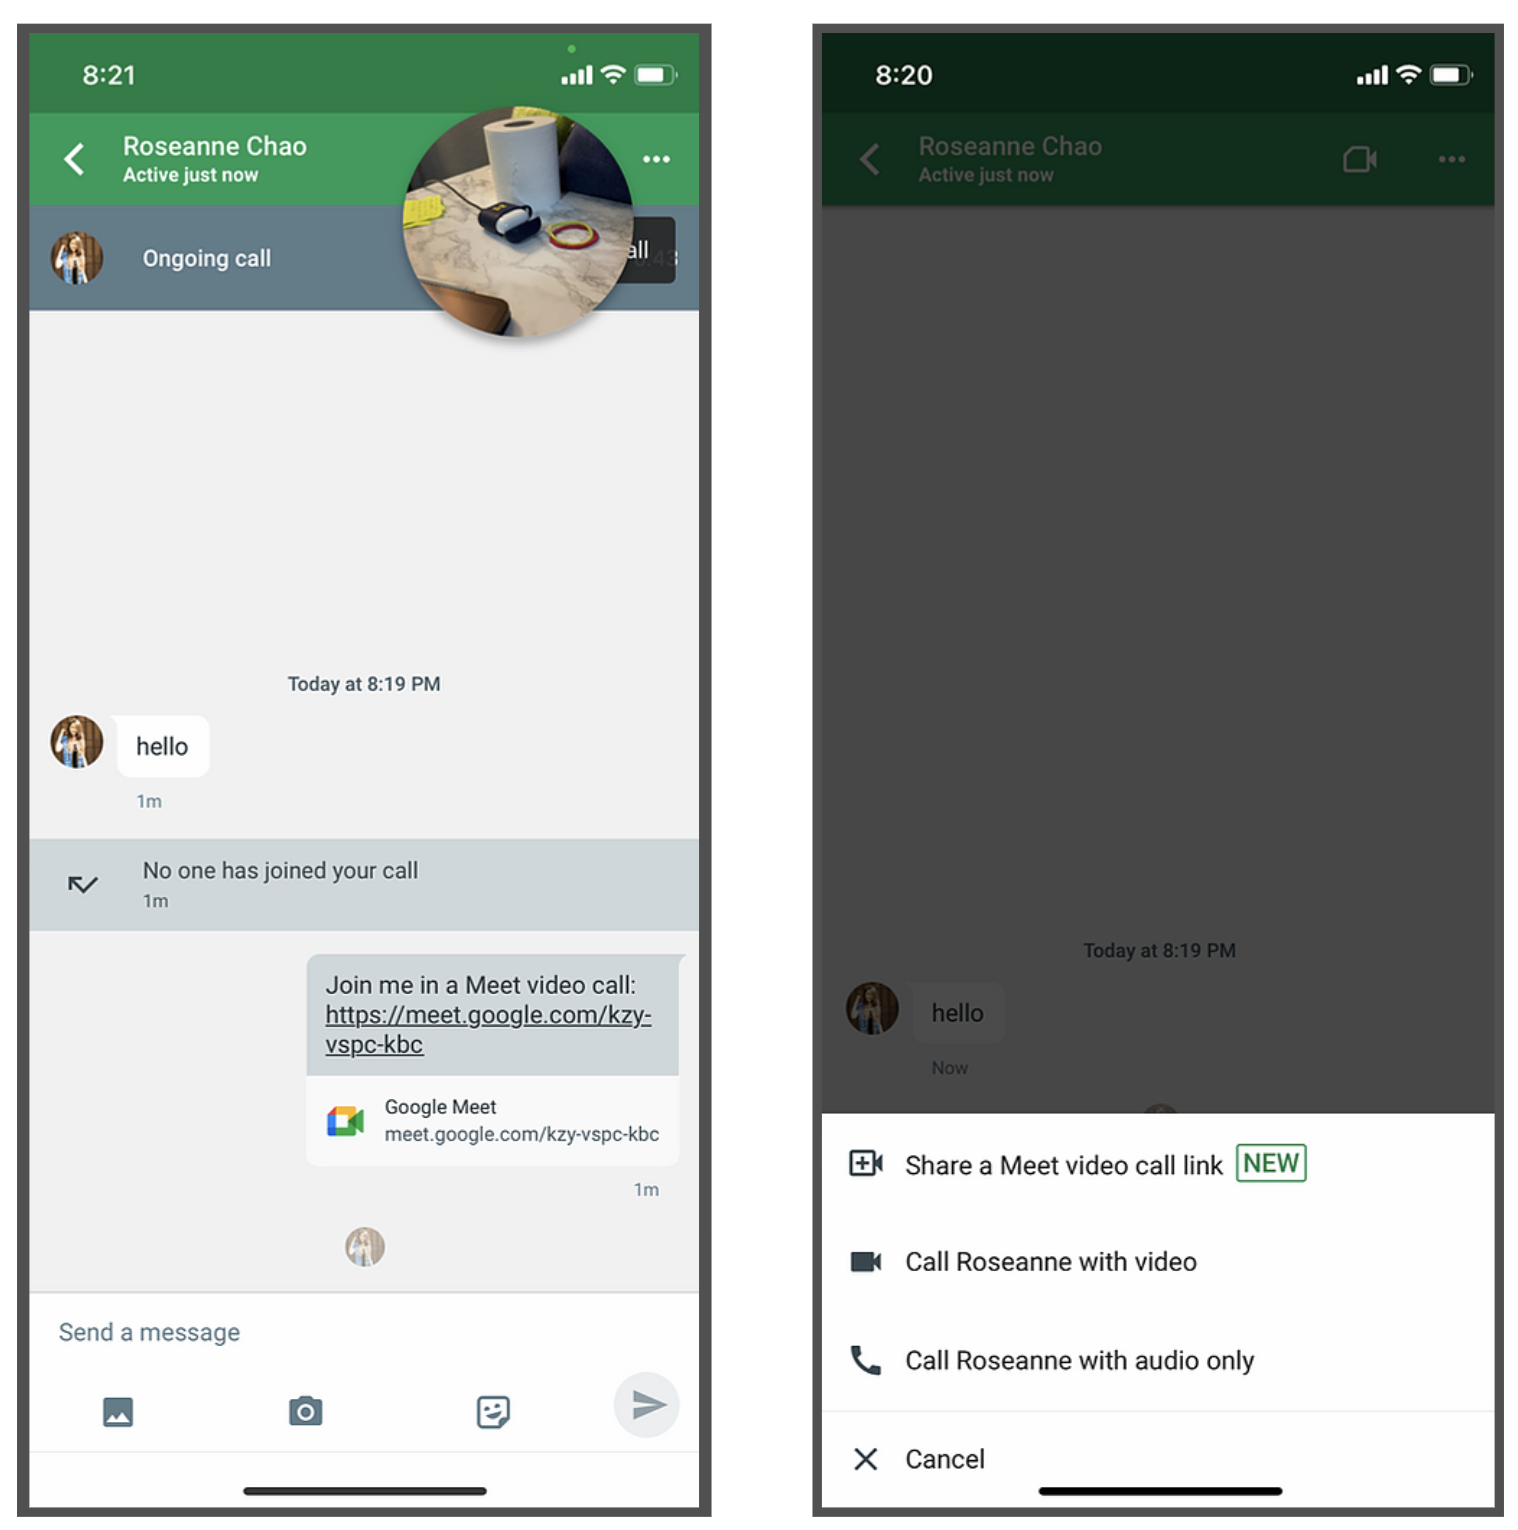 Google Hangouts keeps all chats. Users can call each other directly through the chat.